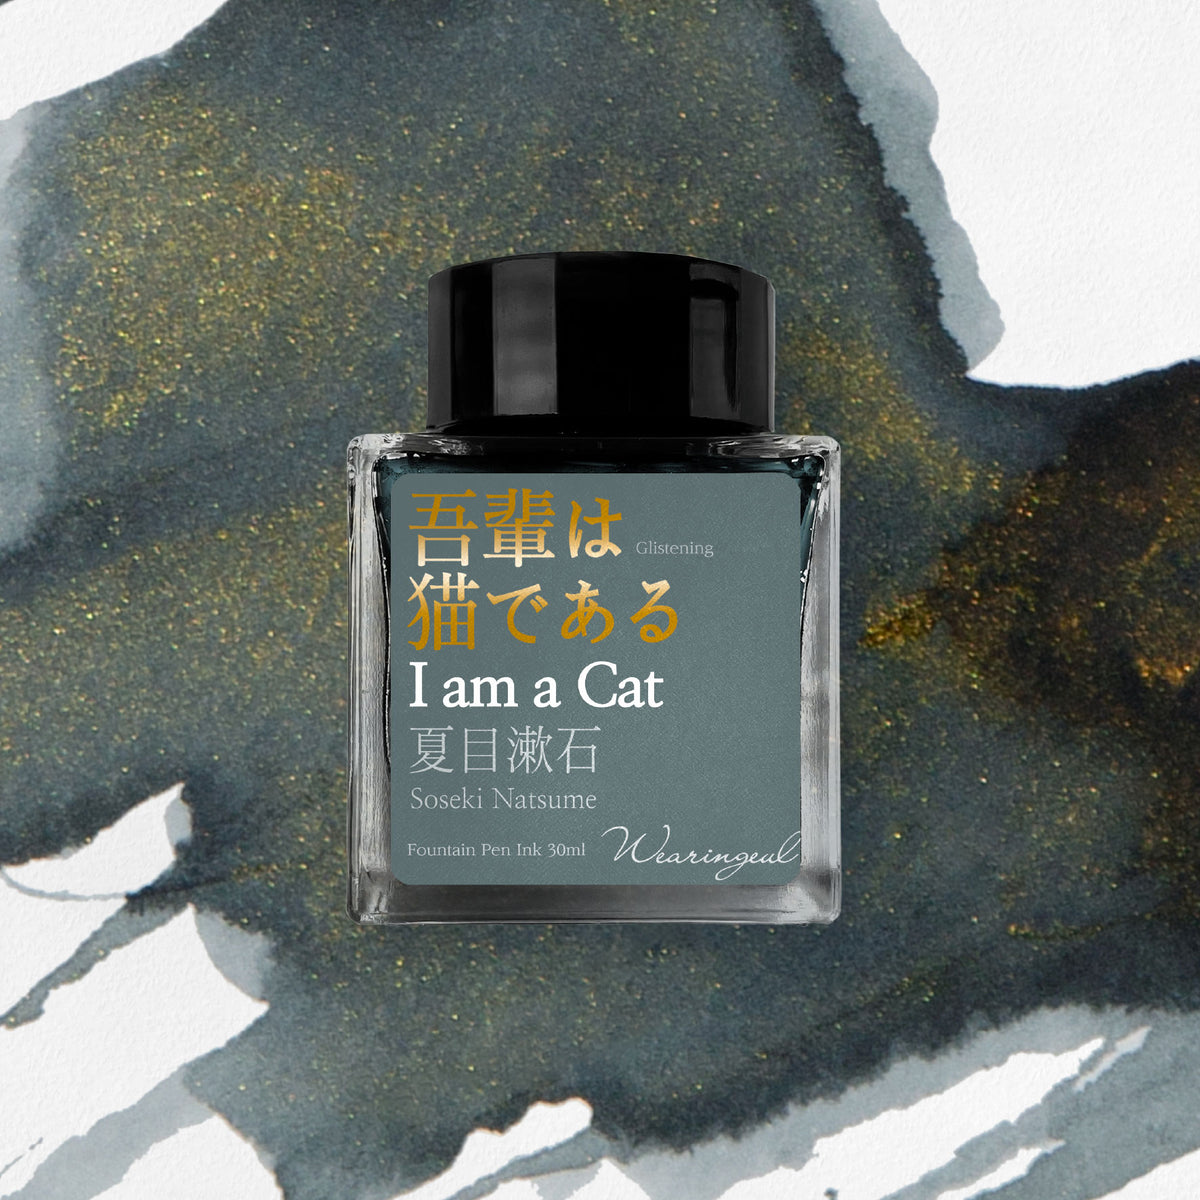 Wearingeul - Fountain Pen Ink - I am a Cat (Shimmer)